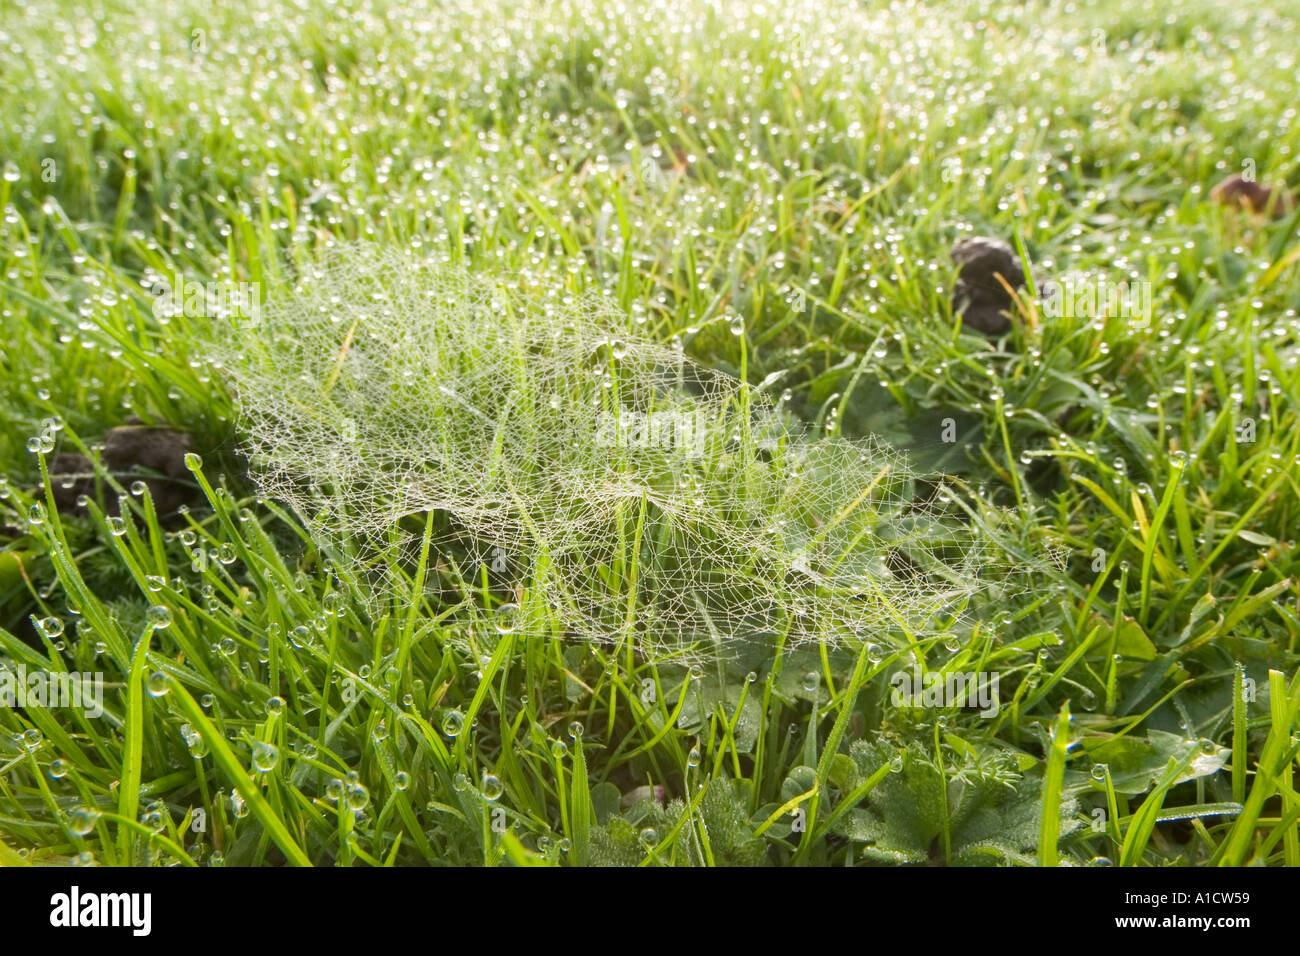 Spider s web soon after dawn with a heavy dew on the grass Stock Photo